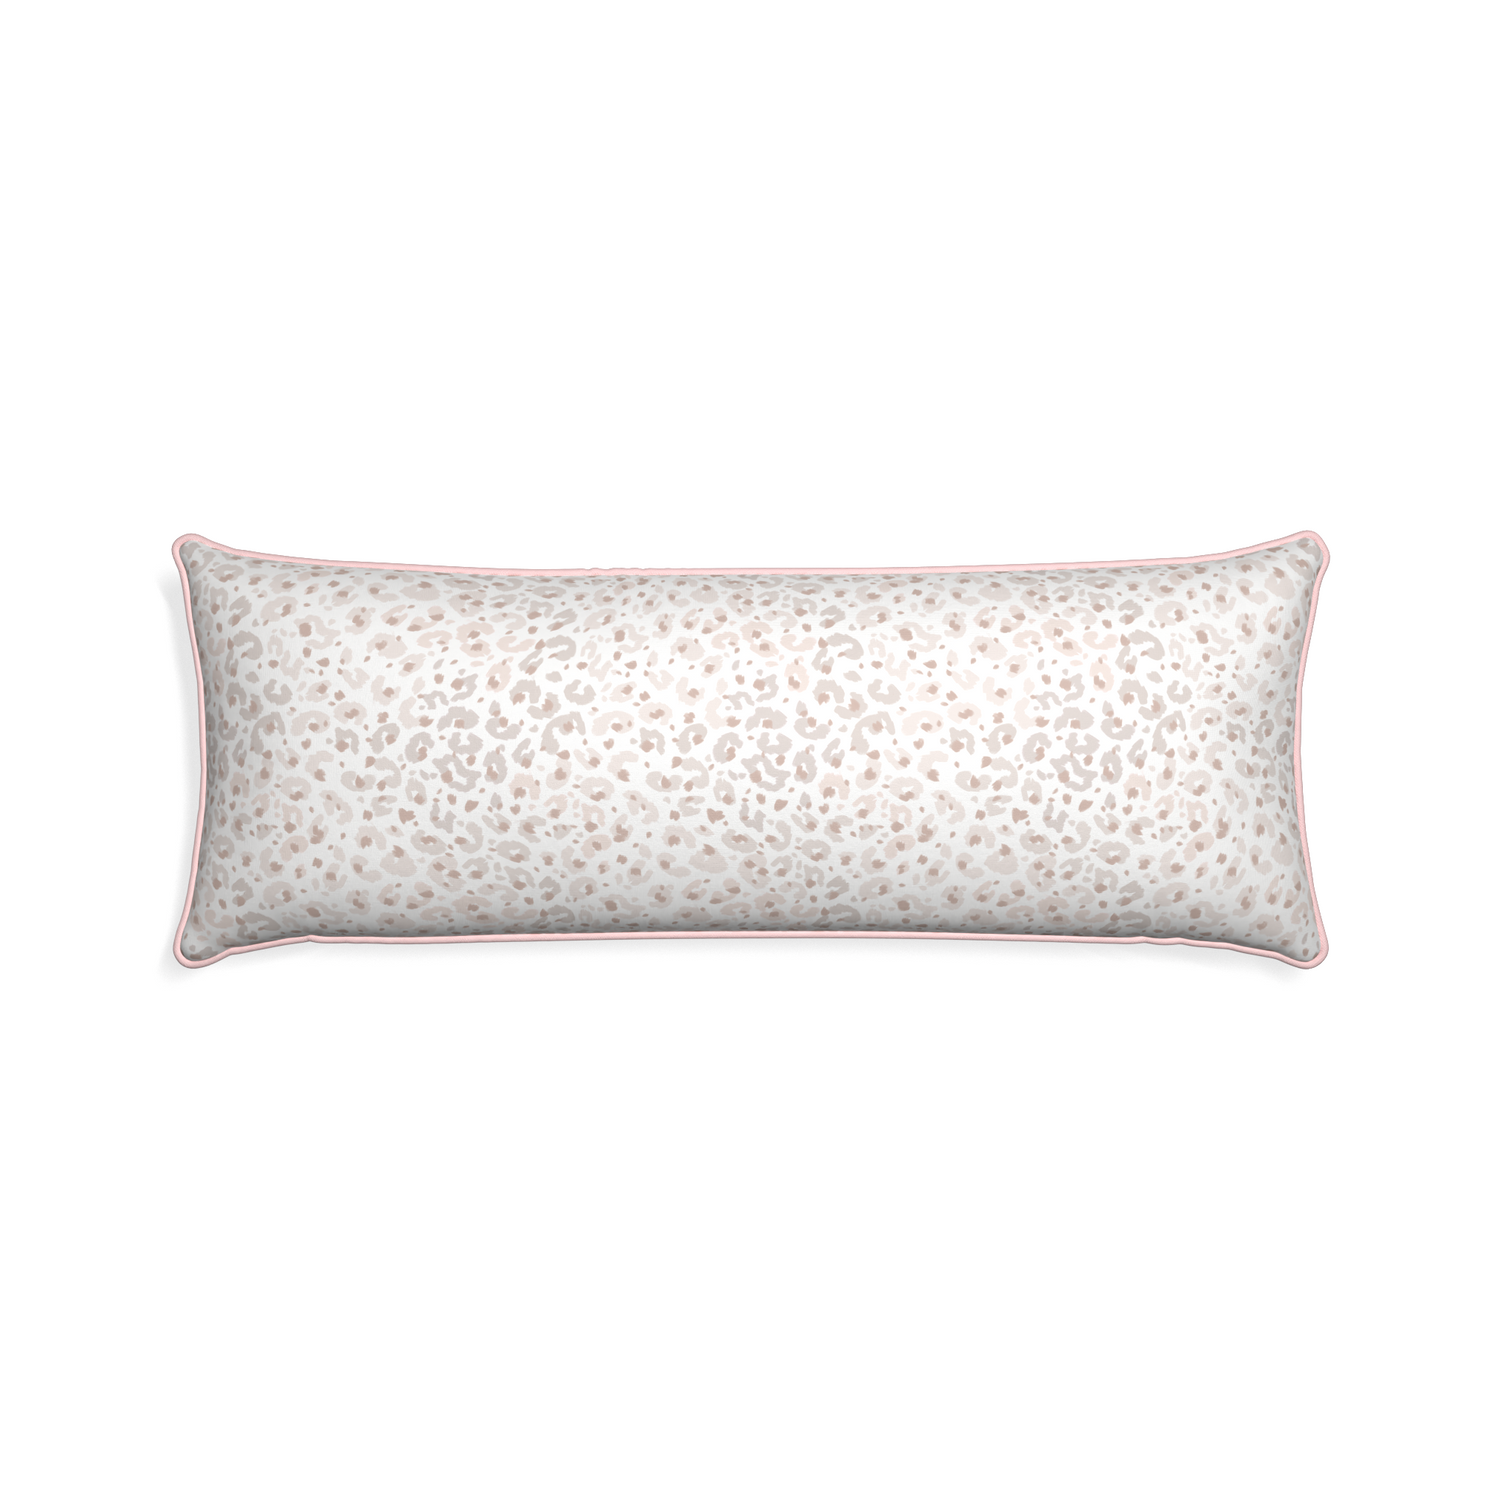 Xl-lumbar rosie custom pillow with petal piping on white background